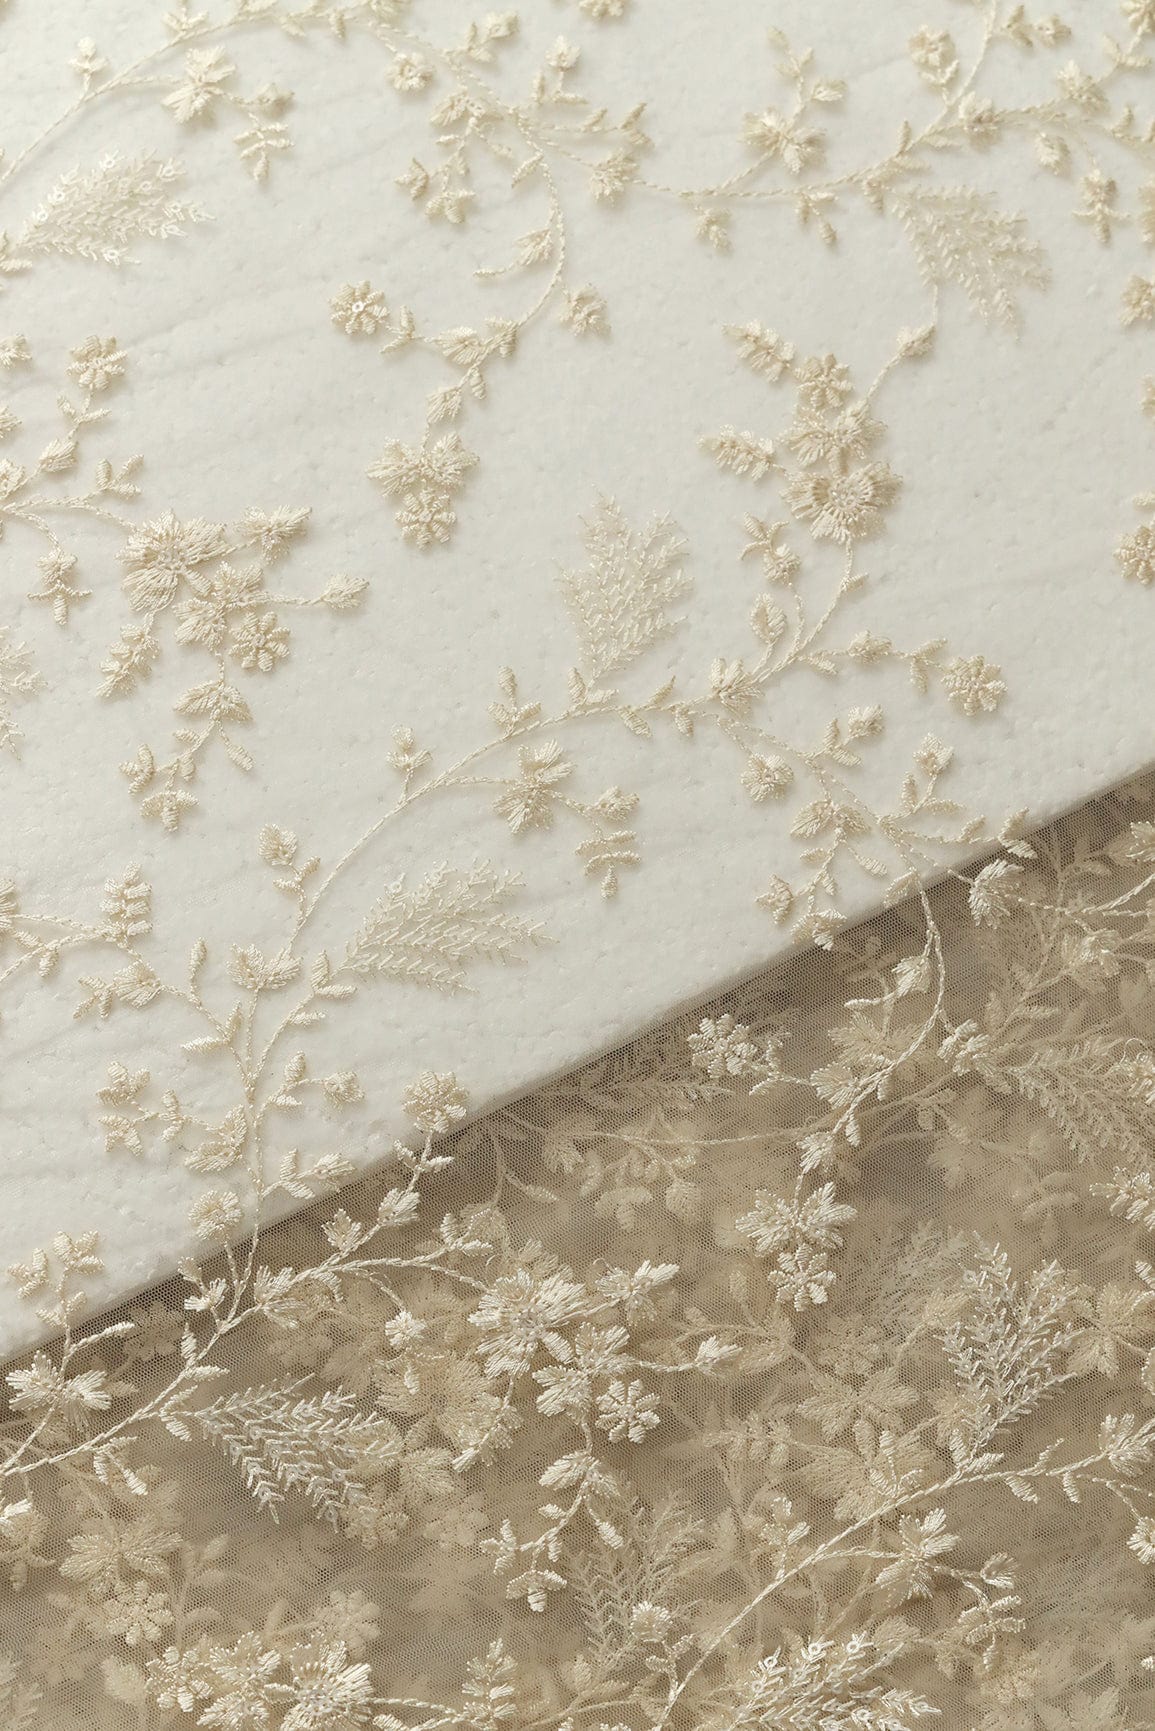 doeraa Embroidery Fabrics Beige Thread With Sequins Beautiful Floral Embroidery Work On Beige Soft Net Fabric